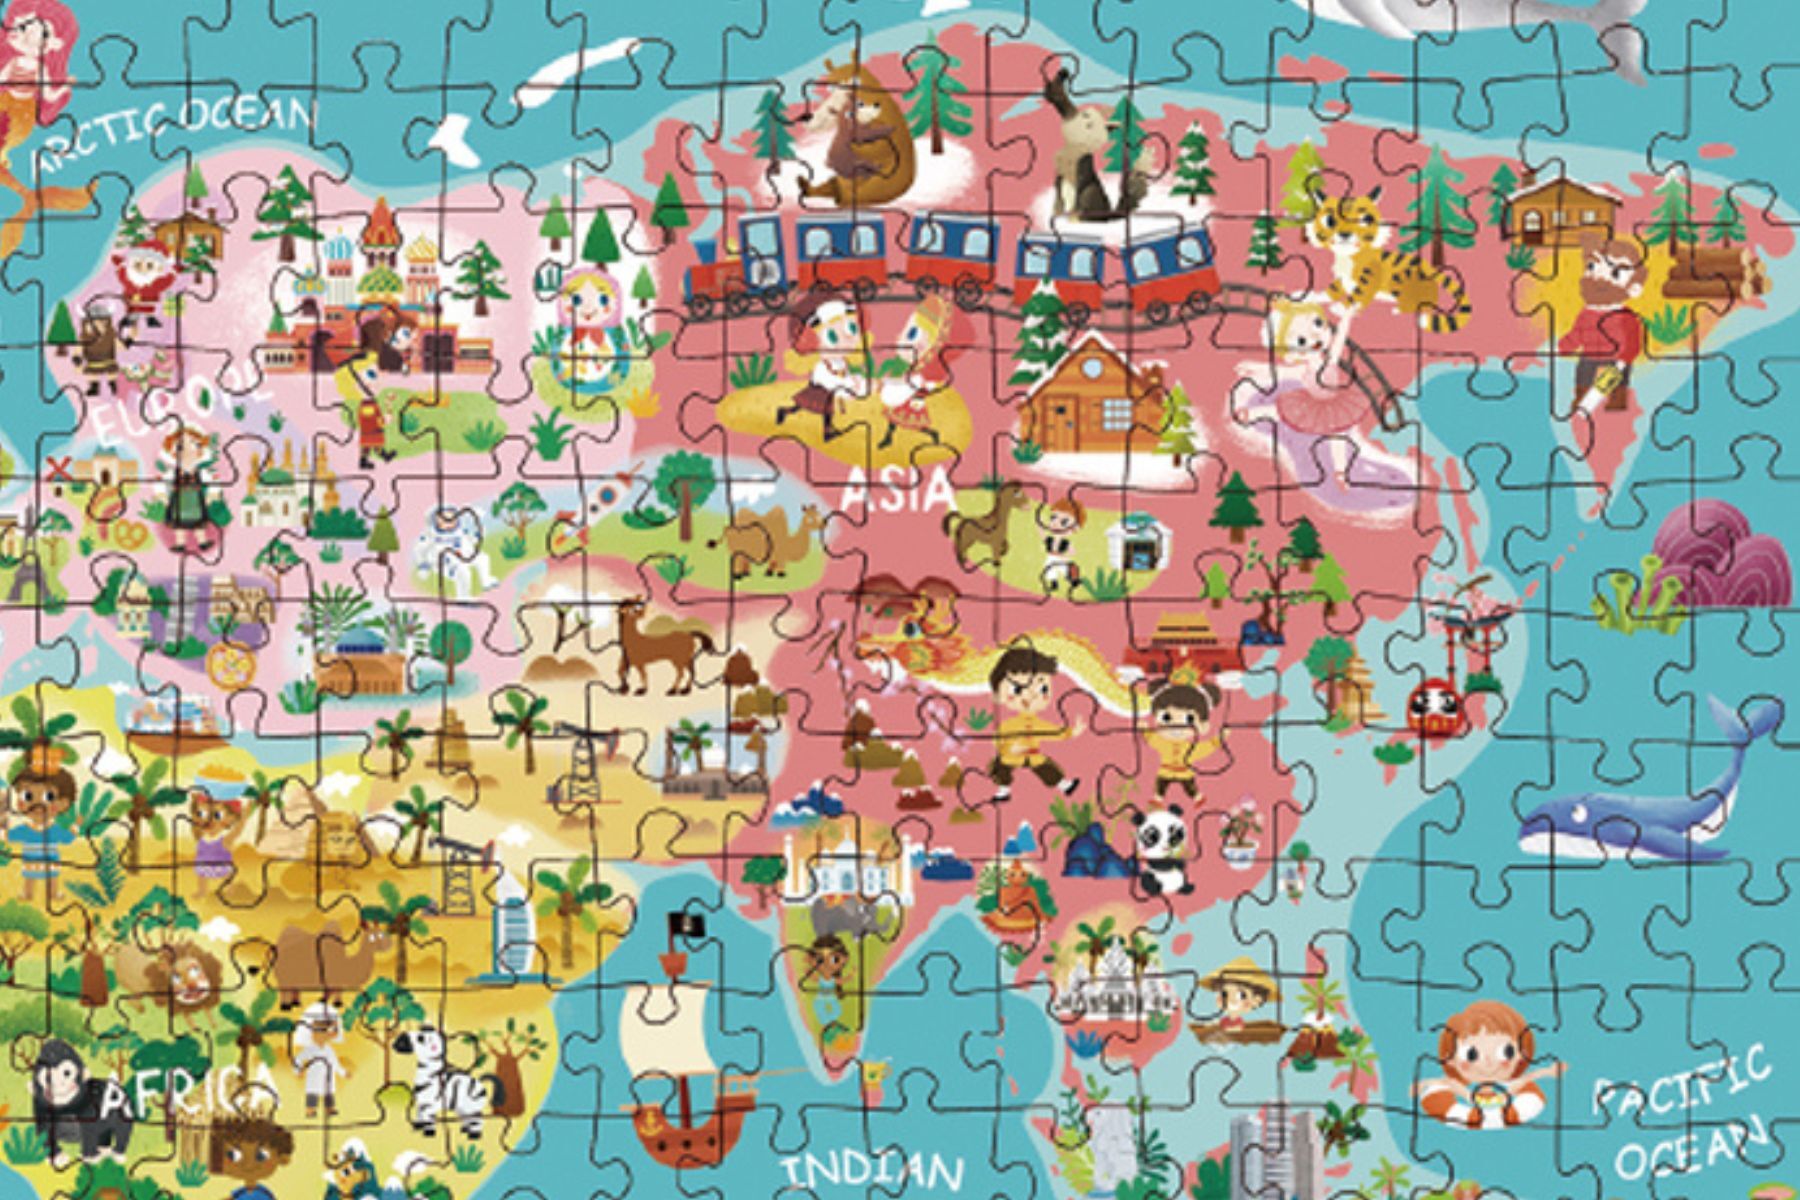 Jigsaw puzzle World Map  Tips for original gifts